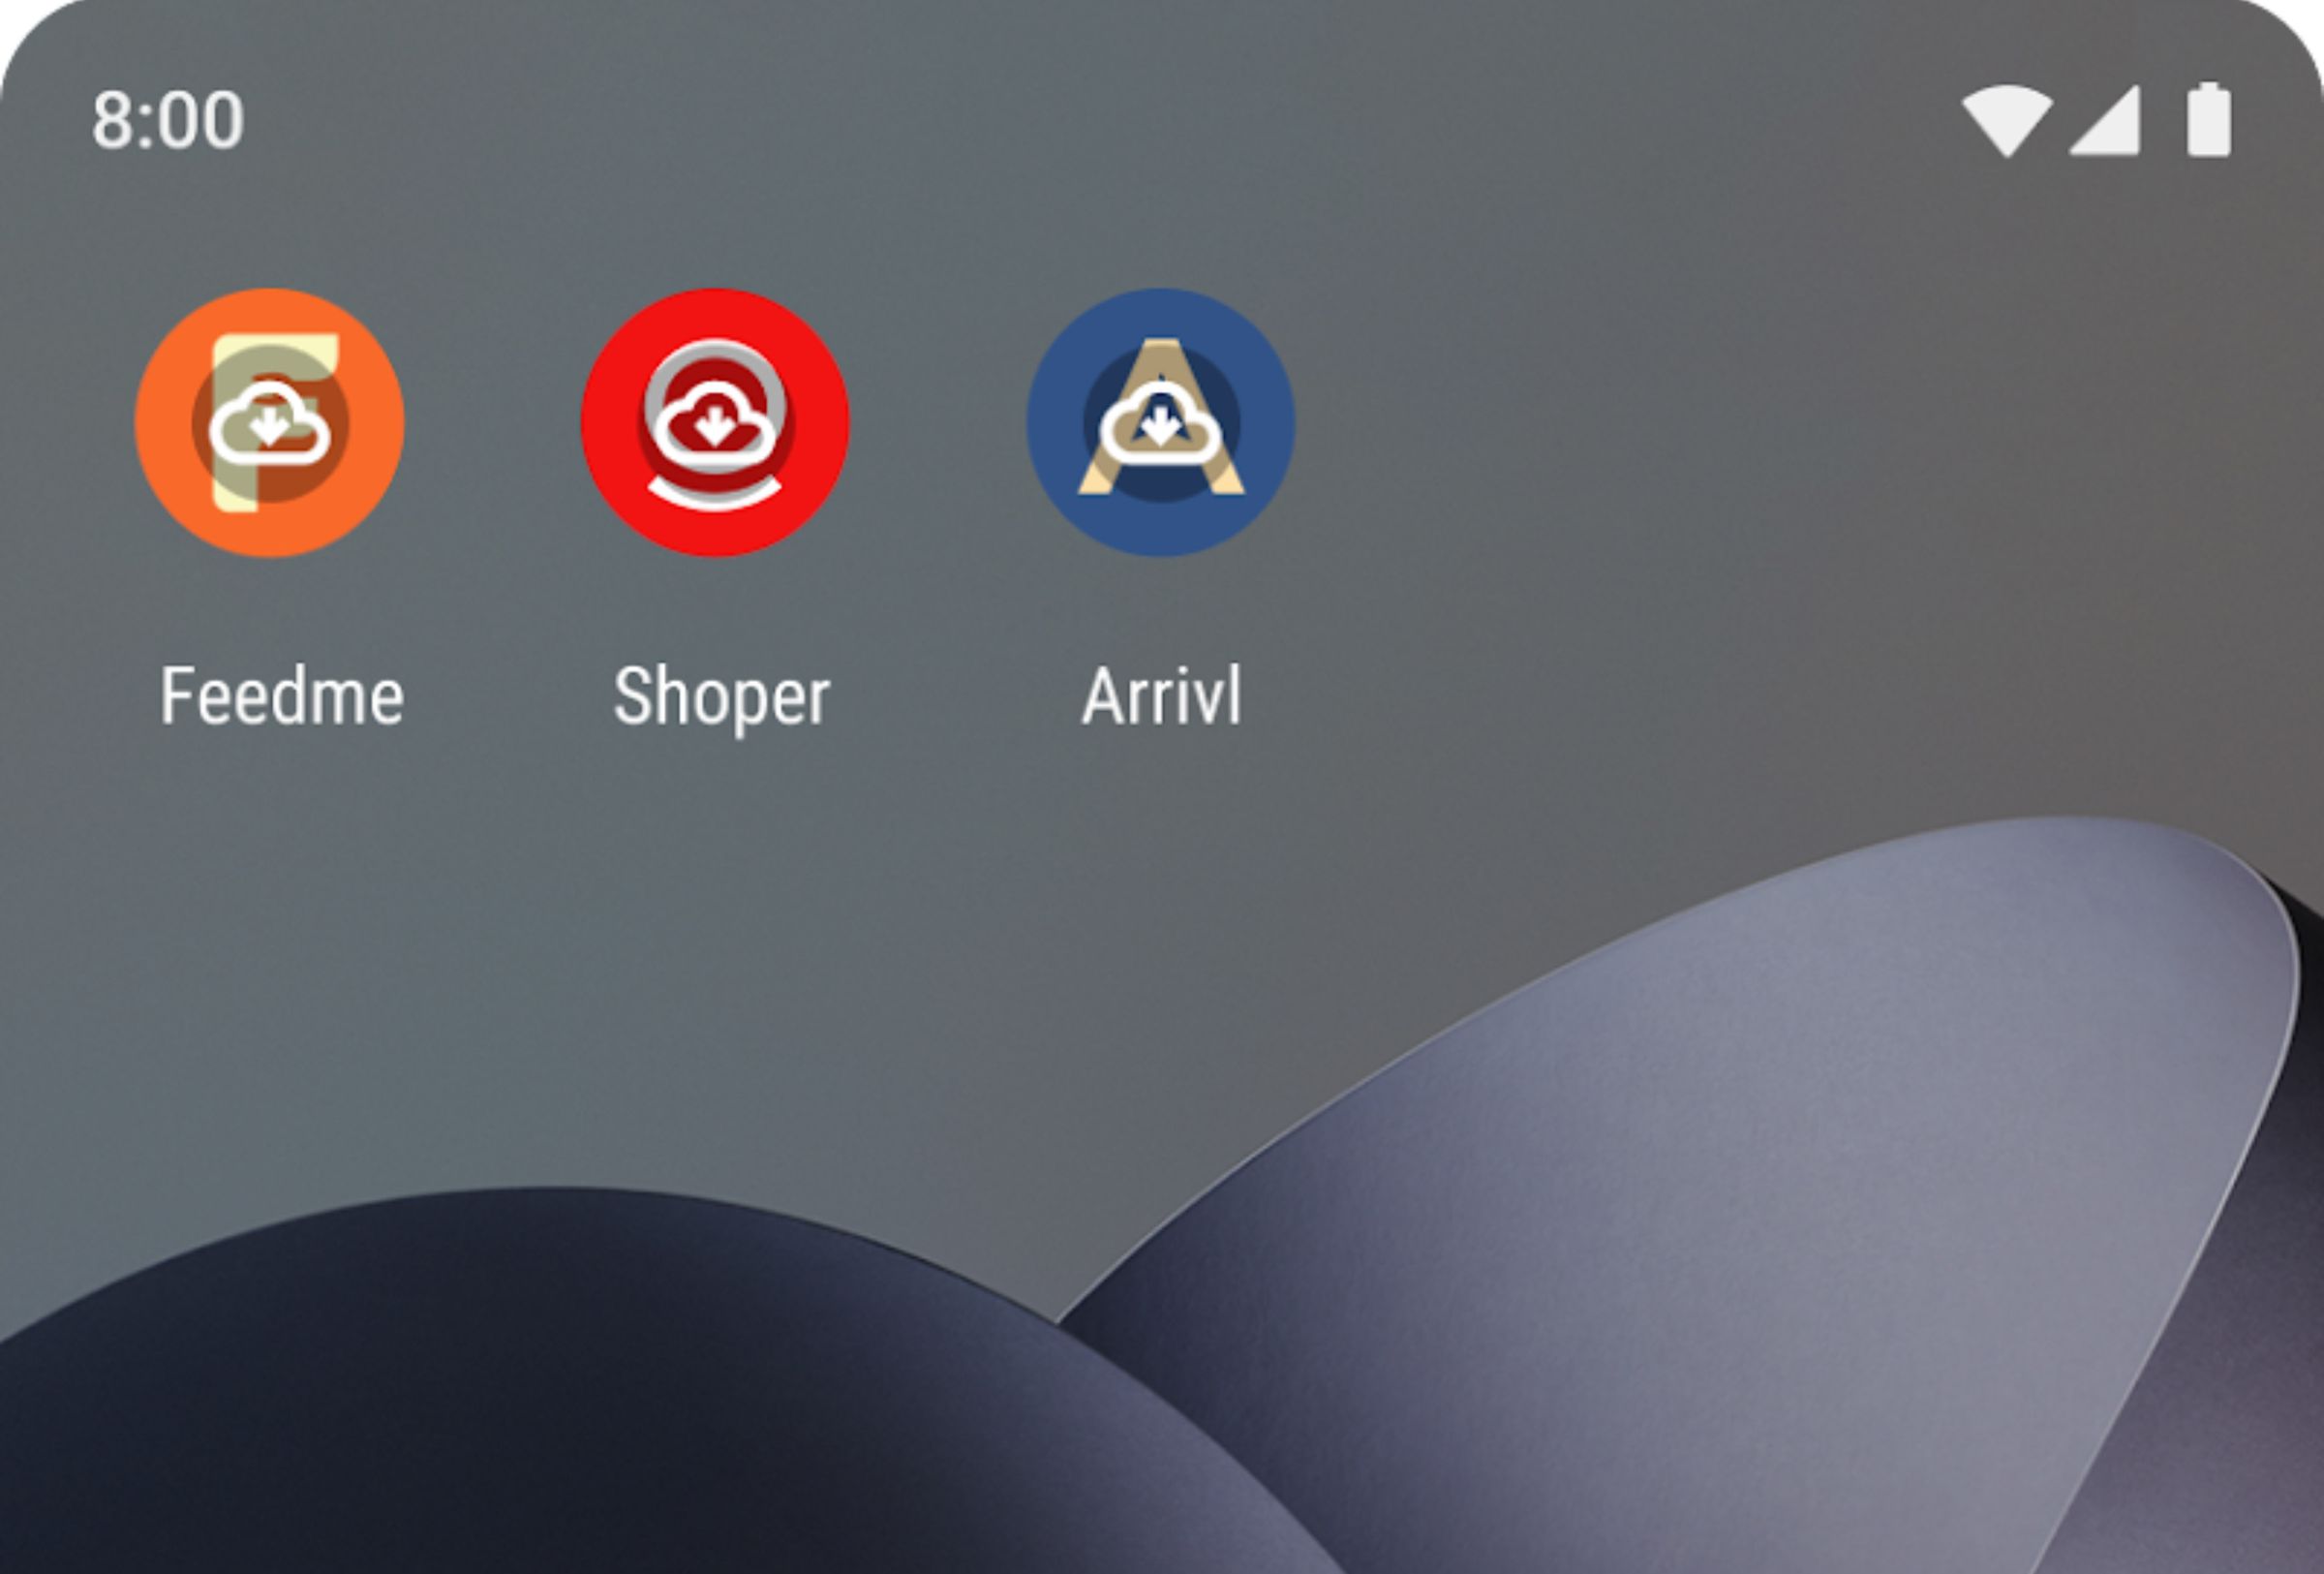 App icons as they appear when Androids auto-archive feature is enabled. The icons have a cloud symbol overlayed.